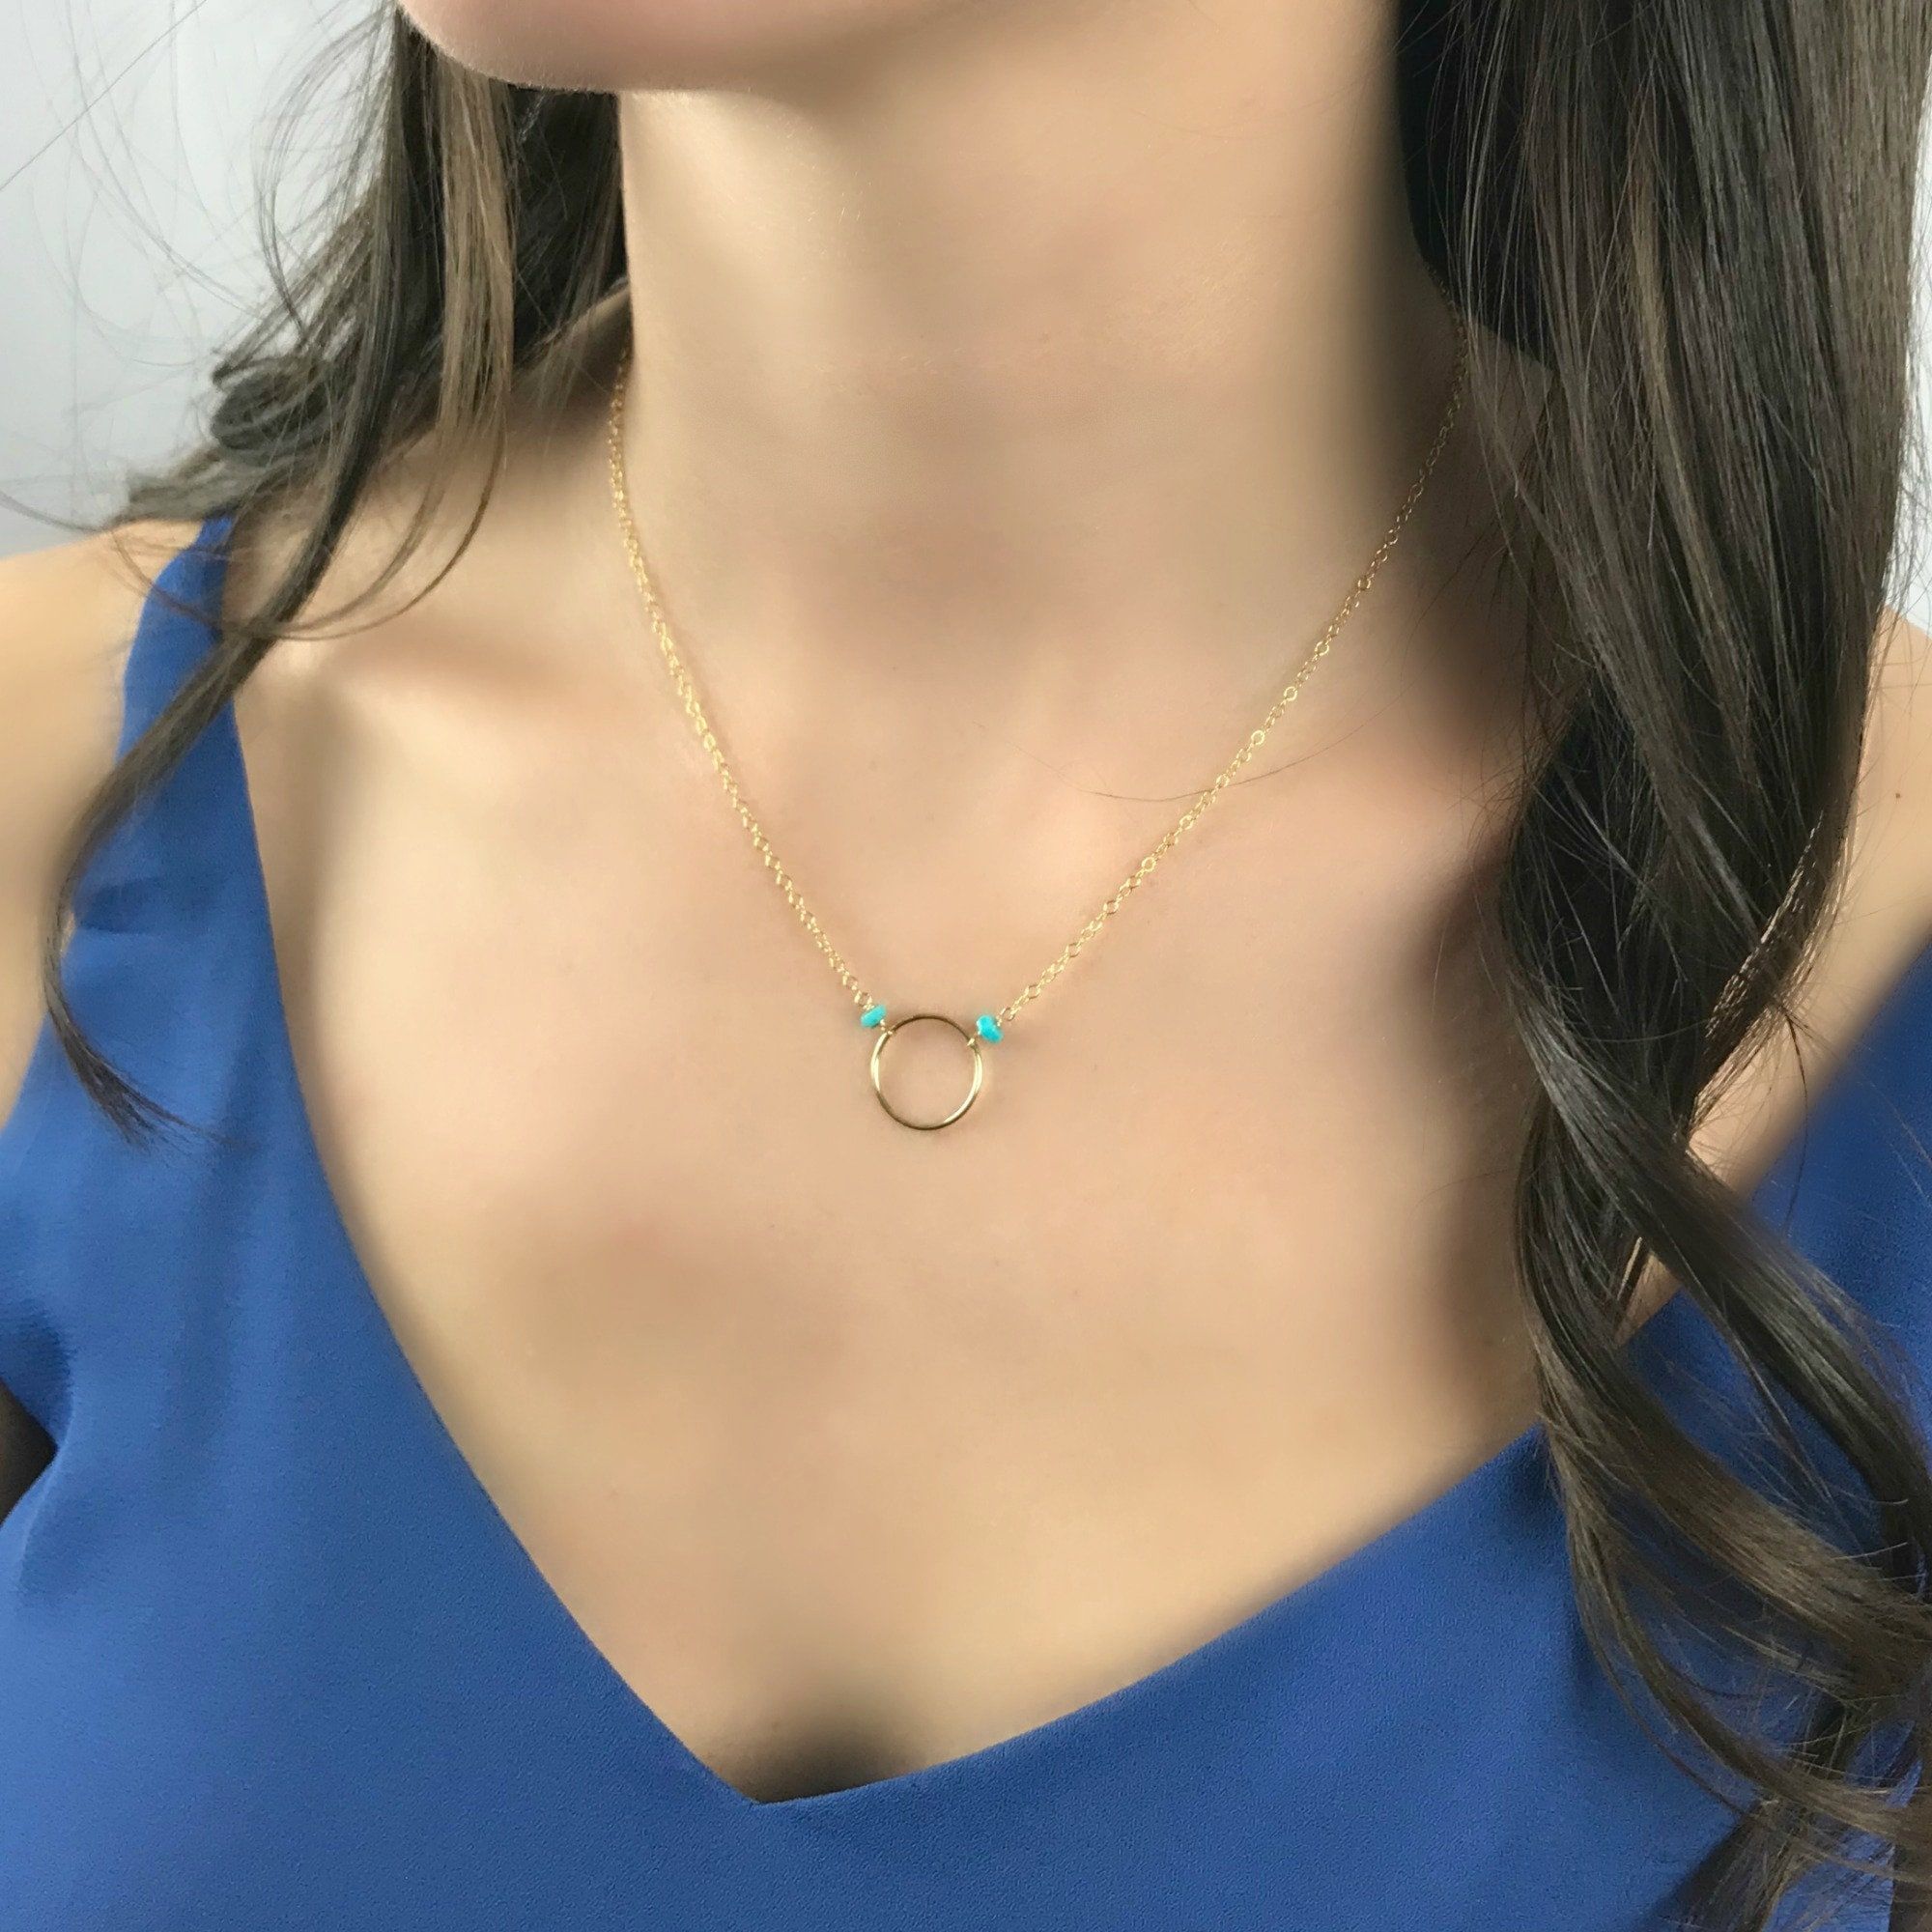 Unlimited Elegance: The Beauty of a Minimalistic Wire Necklace